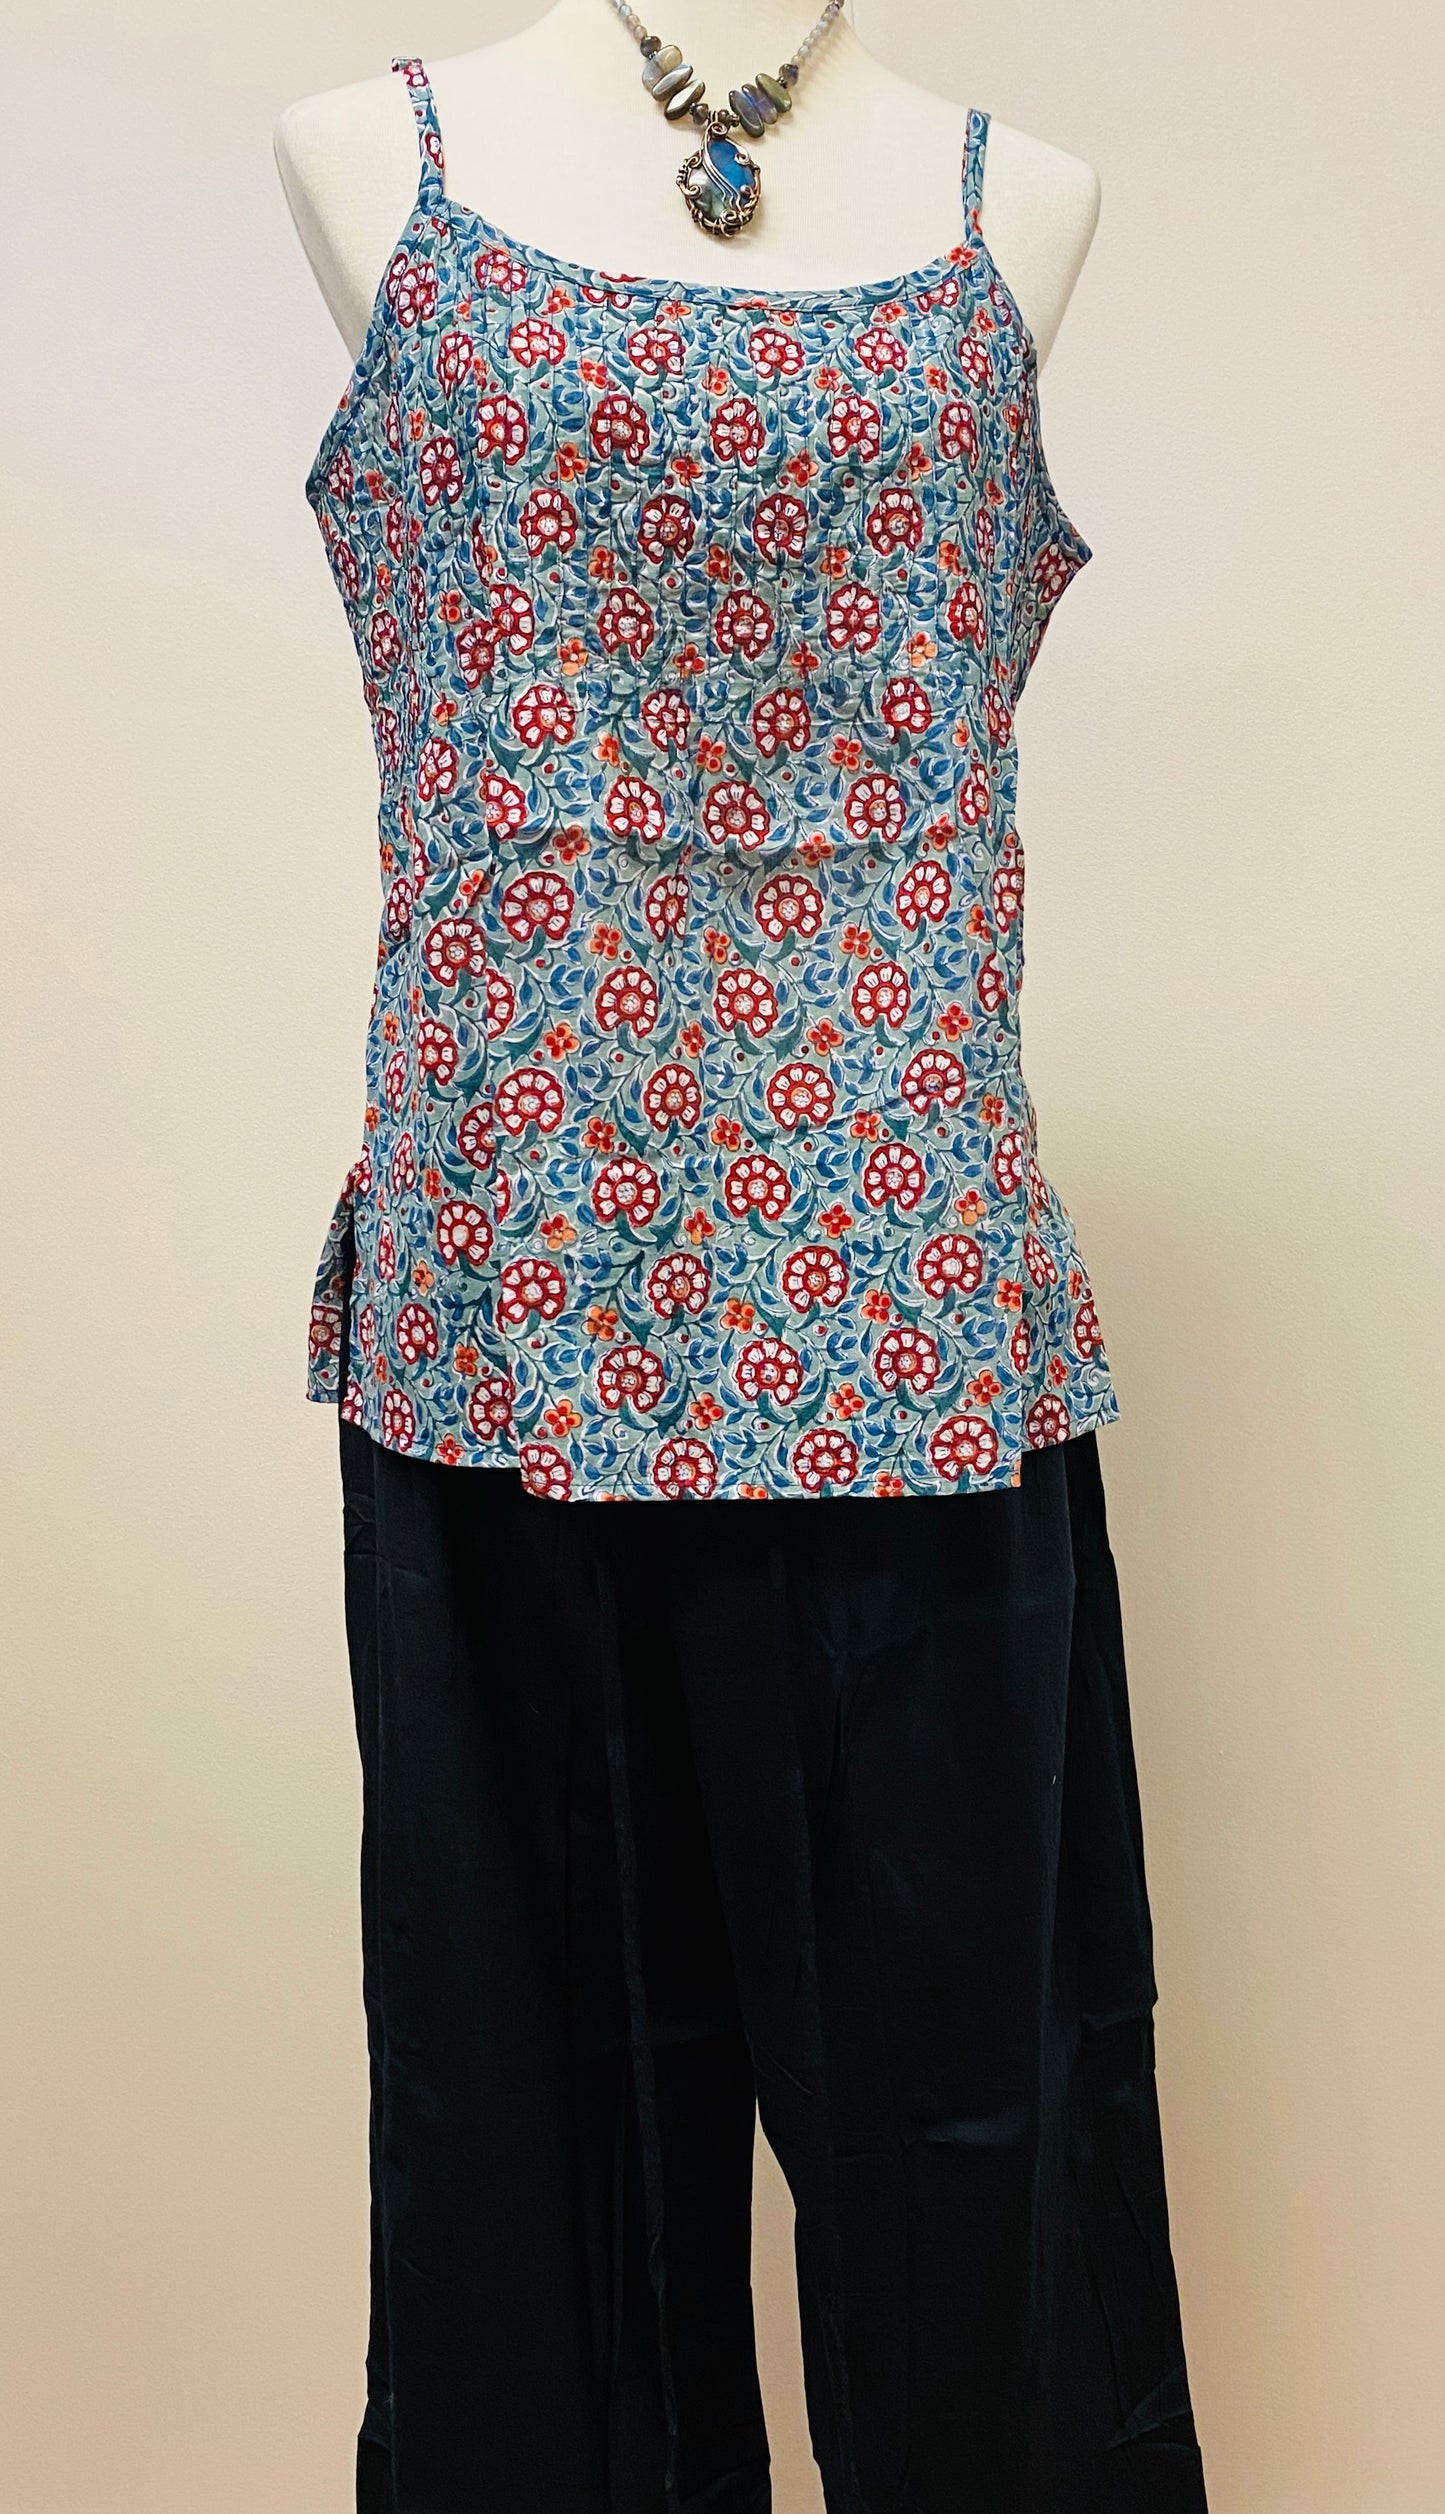 Hand Block Print Cotton Tank Top with pleated detail on top - 4 Patterns Available